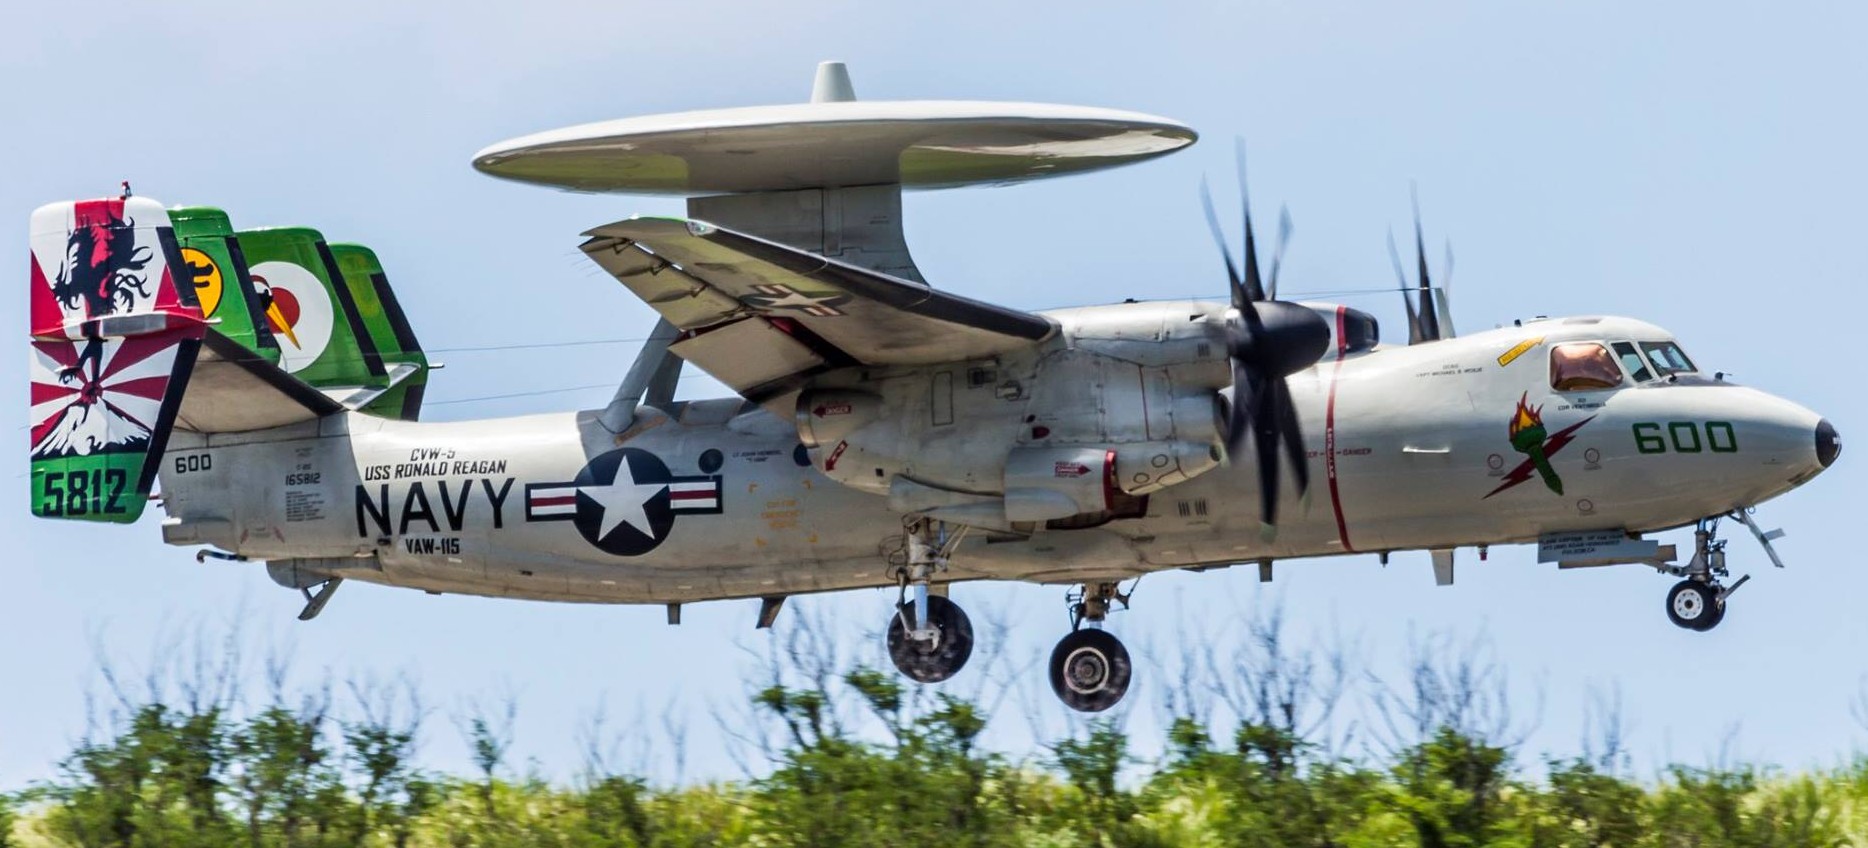 VAW-115 Liberty Bells Airborne Command Control Squadron Navy